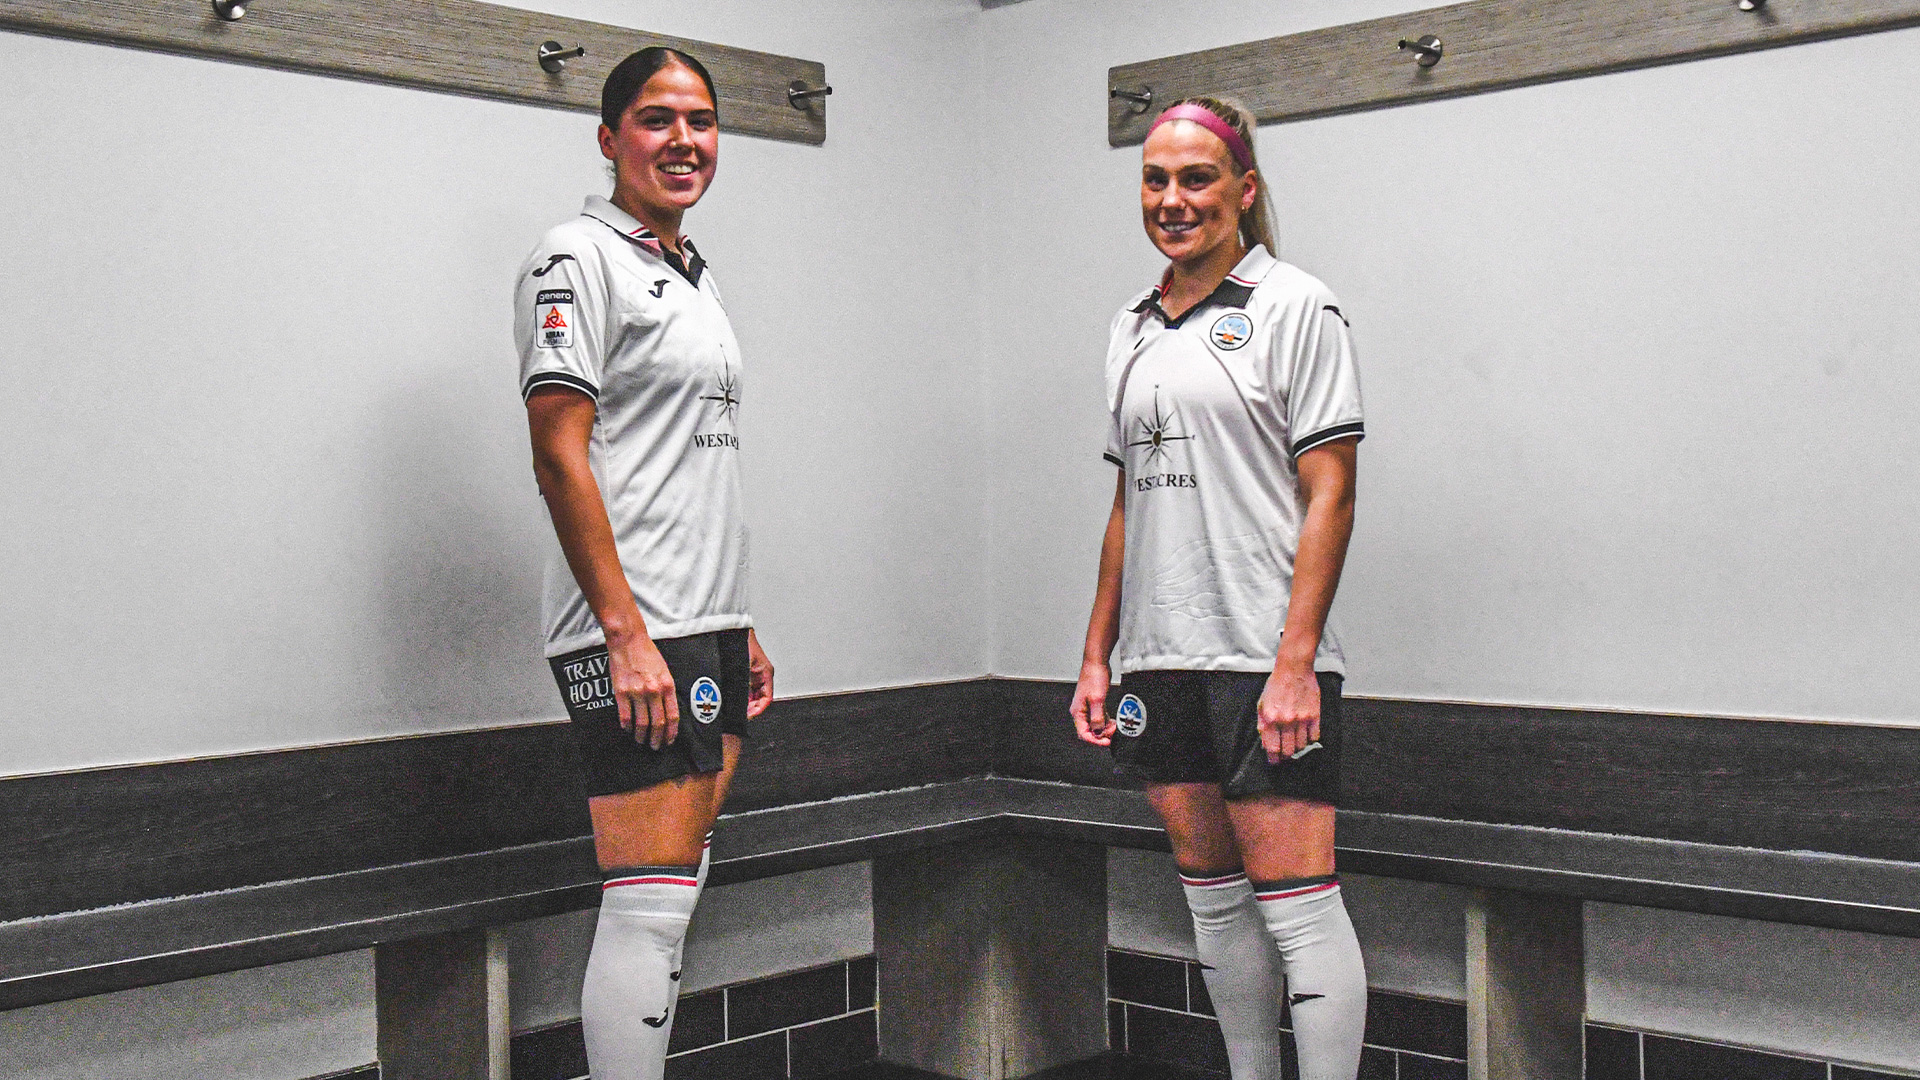 Jess Williams and Ellie Lake model new Swans Ladies kit with black shorts